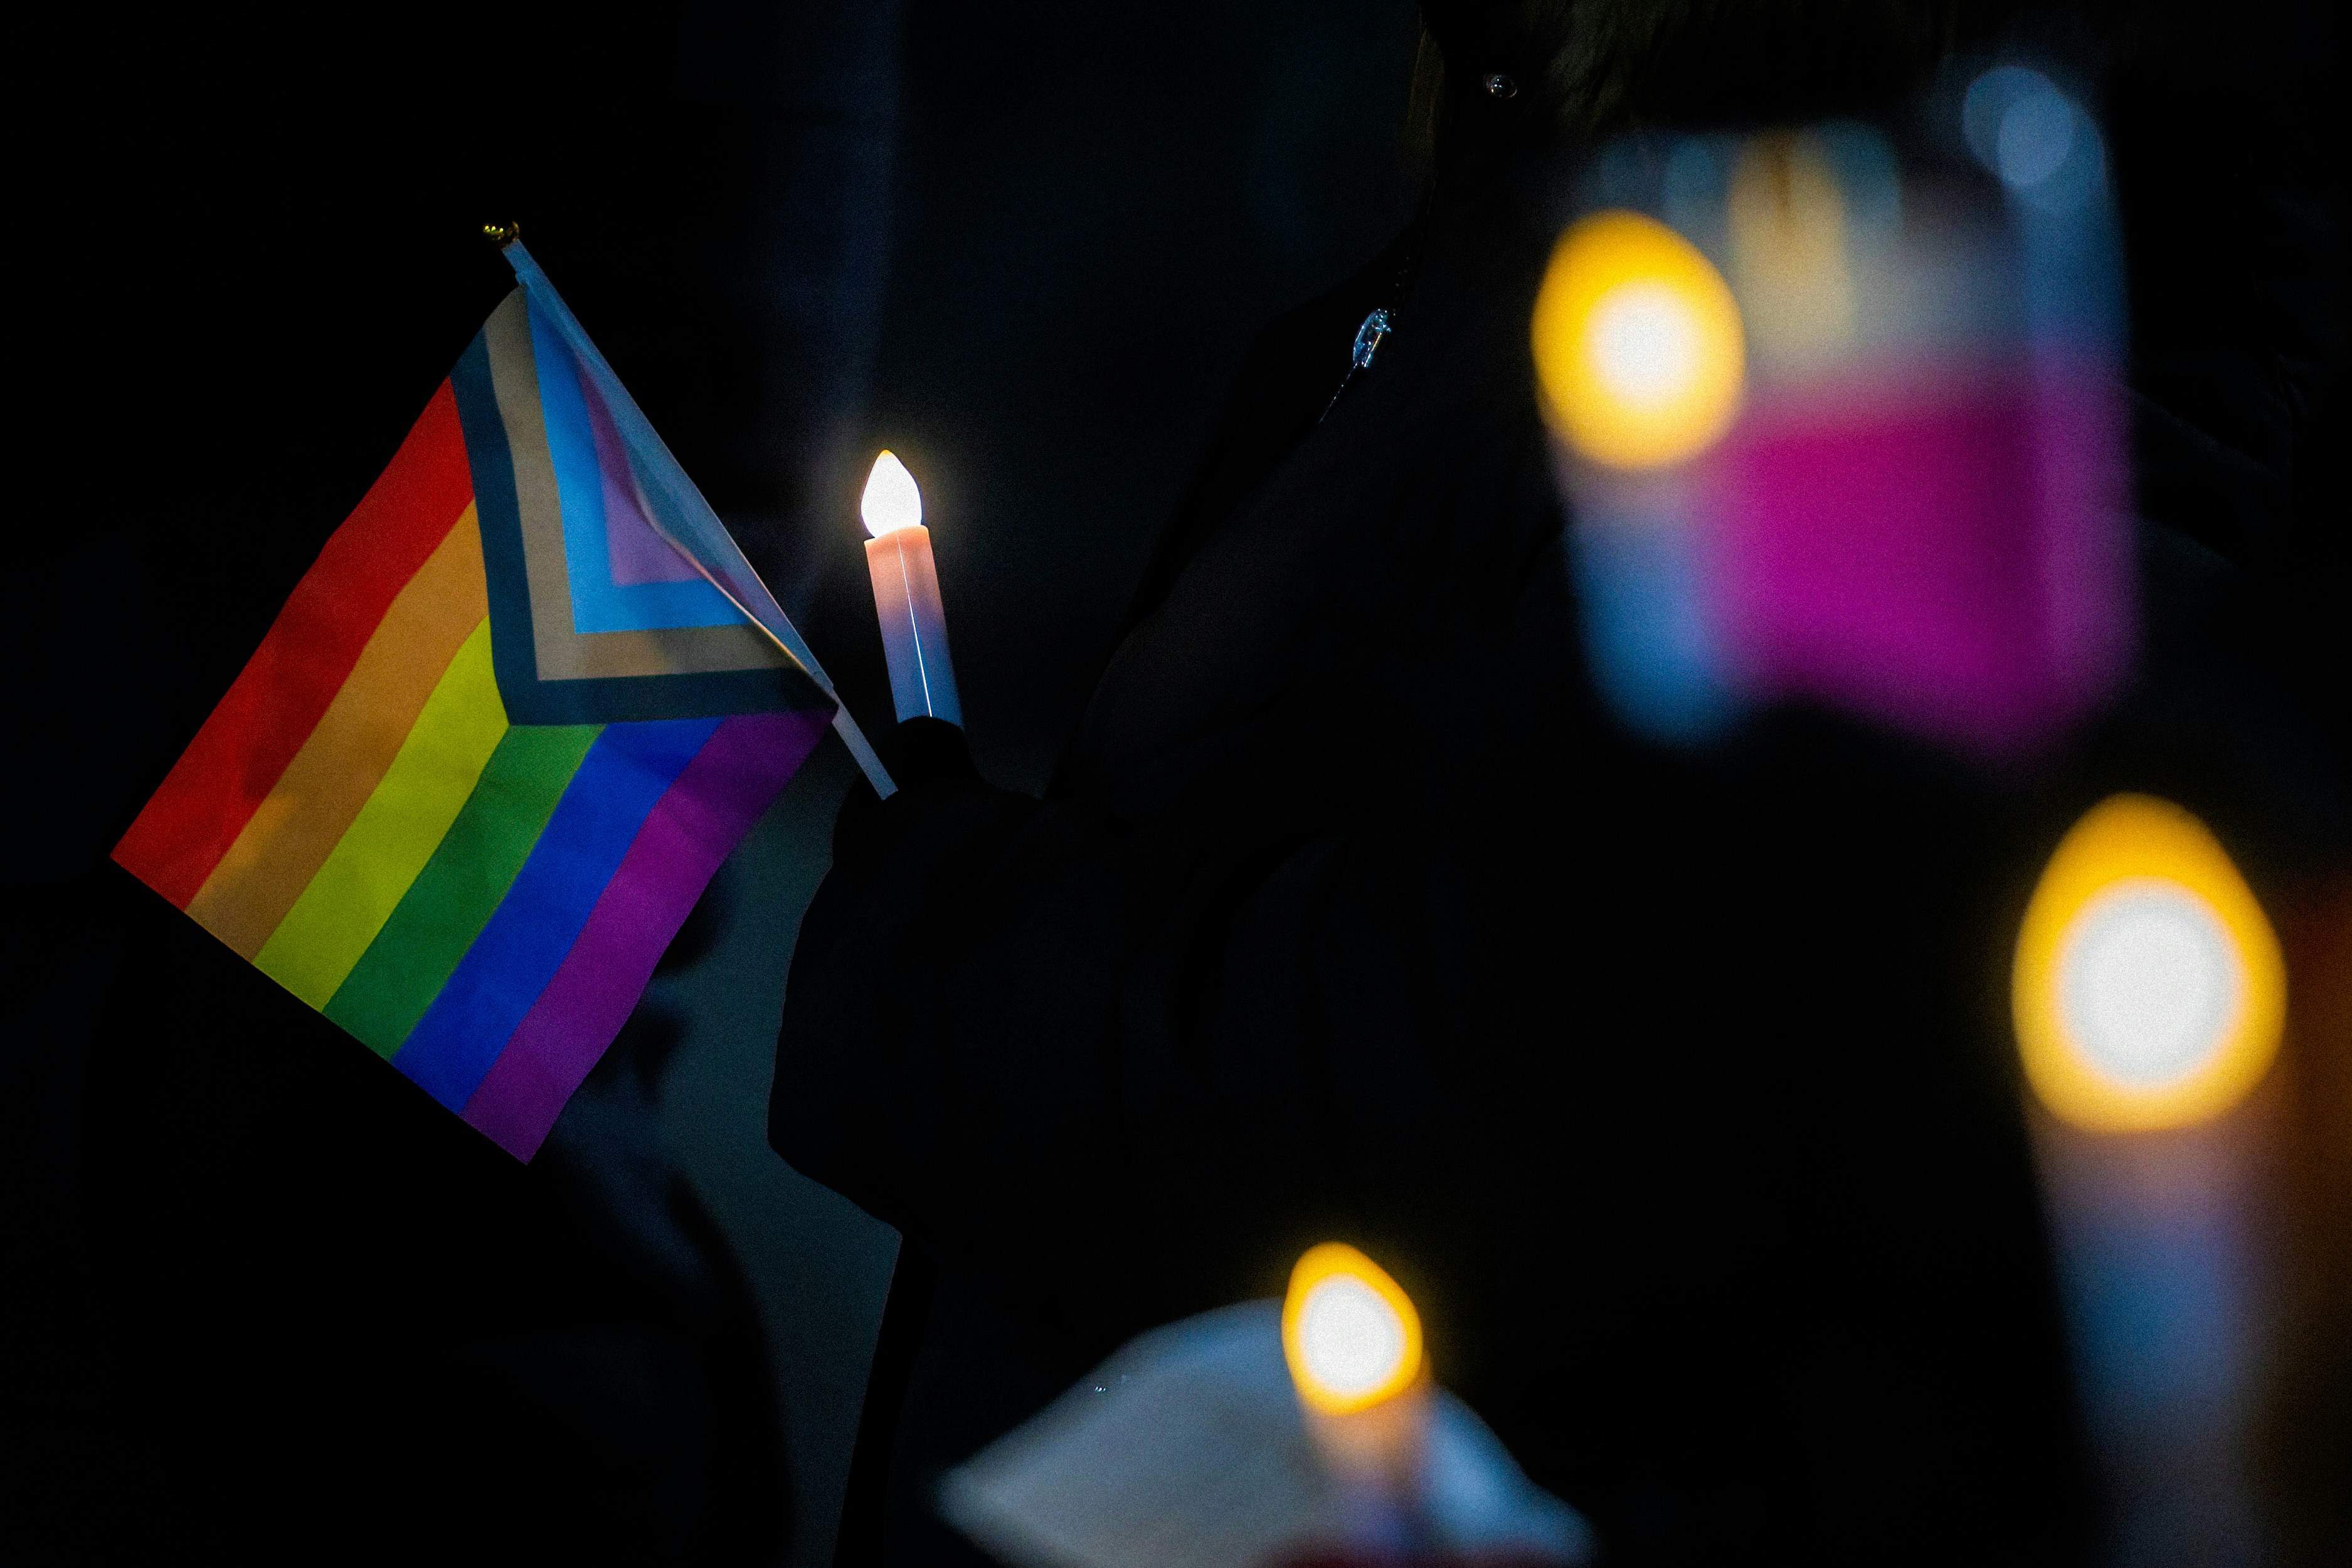 WILKES-BARRE, PENNSYLVANIA, UNITED STATES - 2022/11/20: A woman holds a Pride flag as others hold candles during the vigil. A crowd gathered at the Public Square for a Transgender Day of Remembrance Sunday evening. The vigil was to bring light to the rights of transgender people after a shooting at a gay club in Colorado. (Photo by Aimee Dilger/SOPA Images/LightRocket via Getty Images)